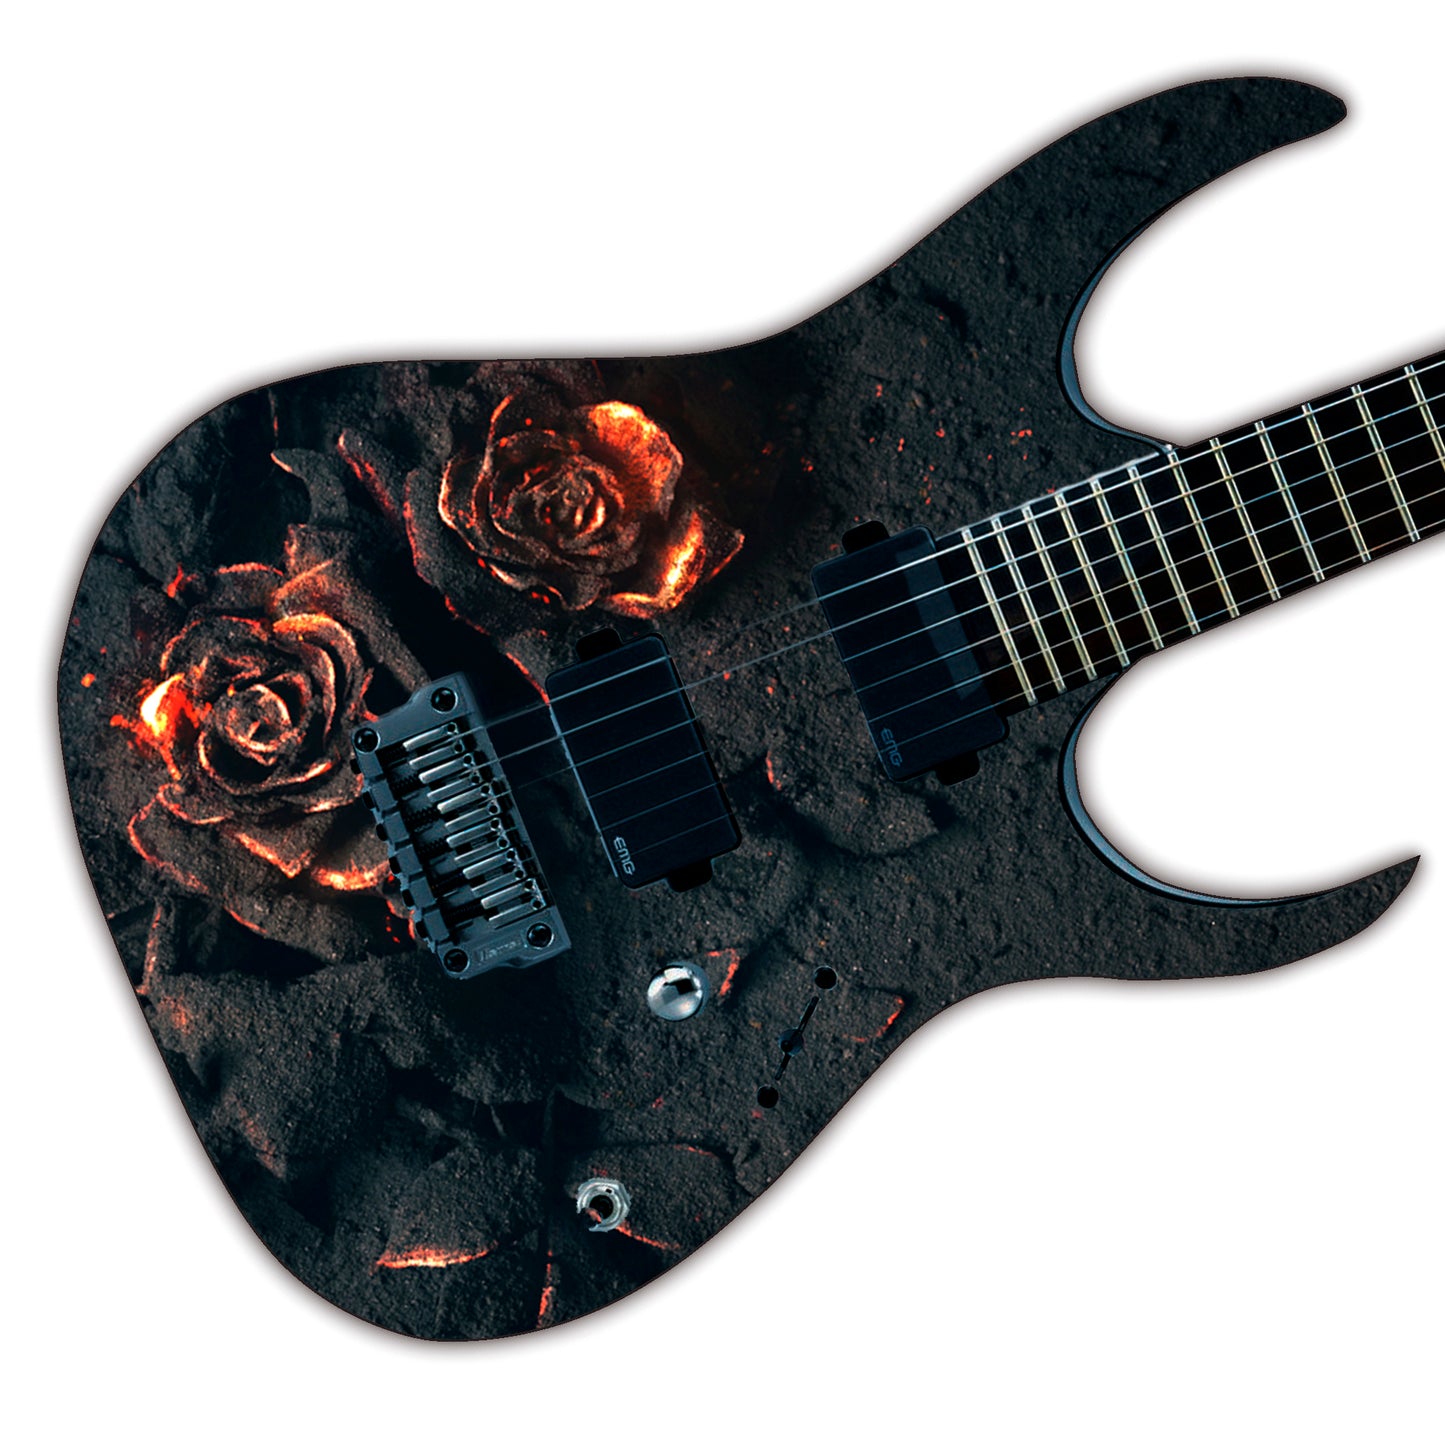 Guitar, Bass or Acoustic Skin Wrap Laminated Vinyl Decal Sticker The Ash Roses GS71